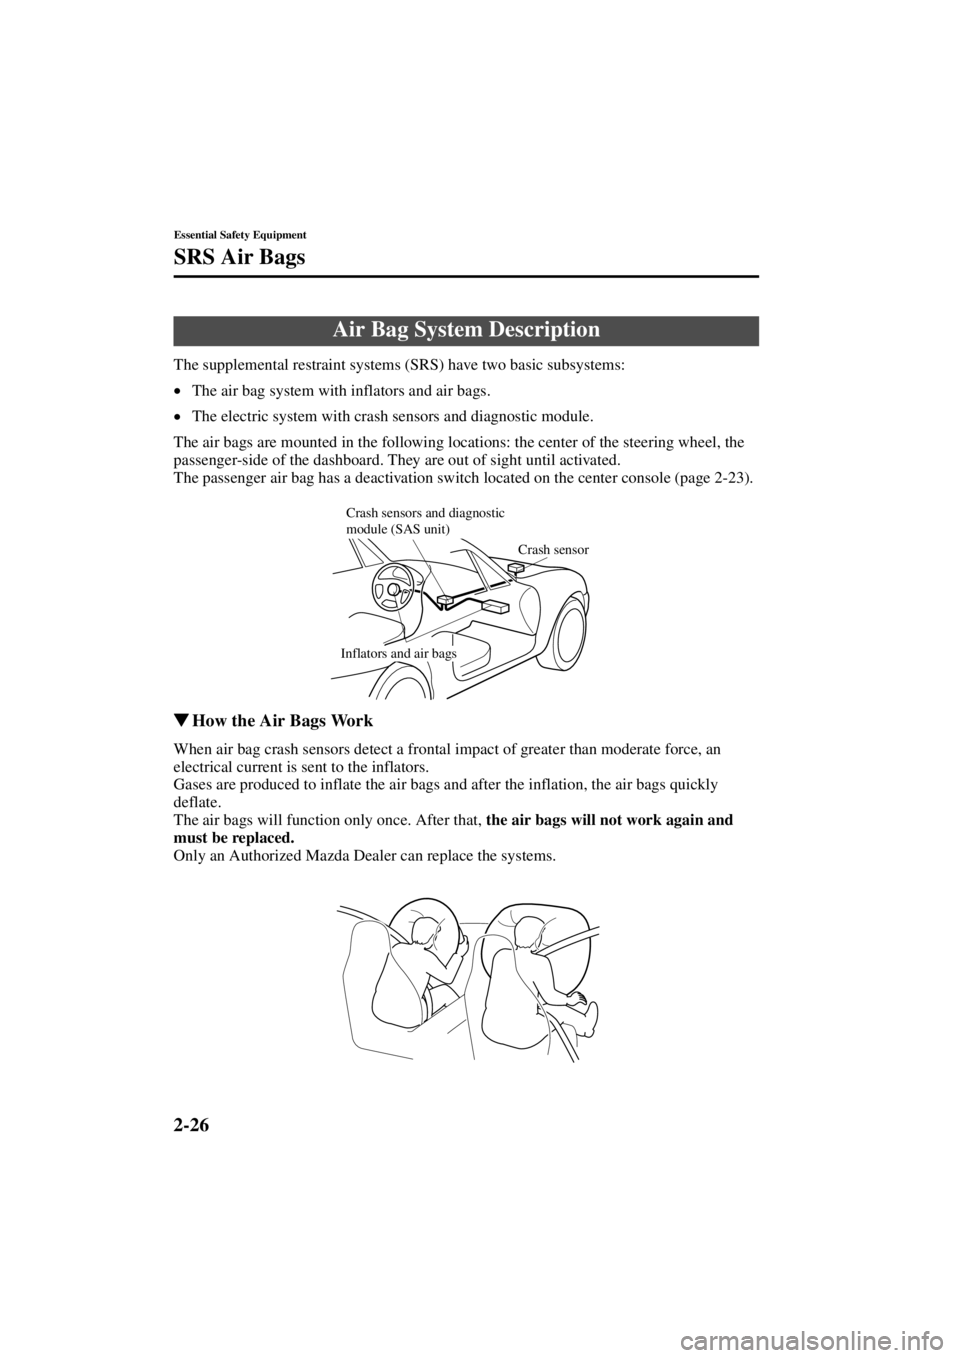 MAZDA MODEL SPEED MX-5 MIATA 2004  Owners Manual 2-26
Essential Safety Equipment
SRS Air Bags
Form No. 8T02-EA-03L
The supplemental restraint systems (SRS) have two basic subsystems:
•The air bag system with inflators and air bags.
• The electri